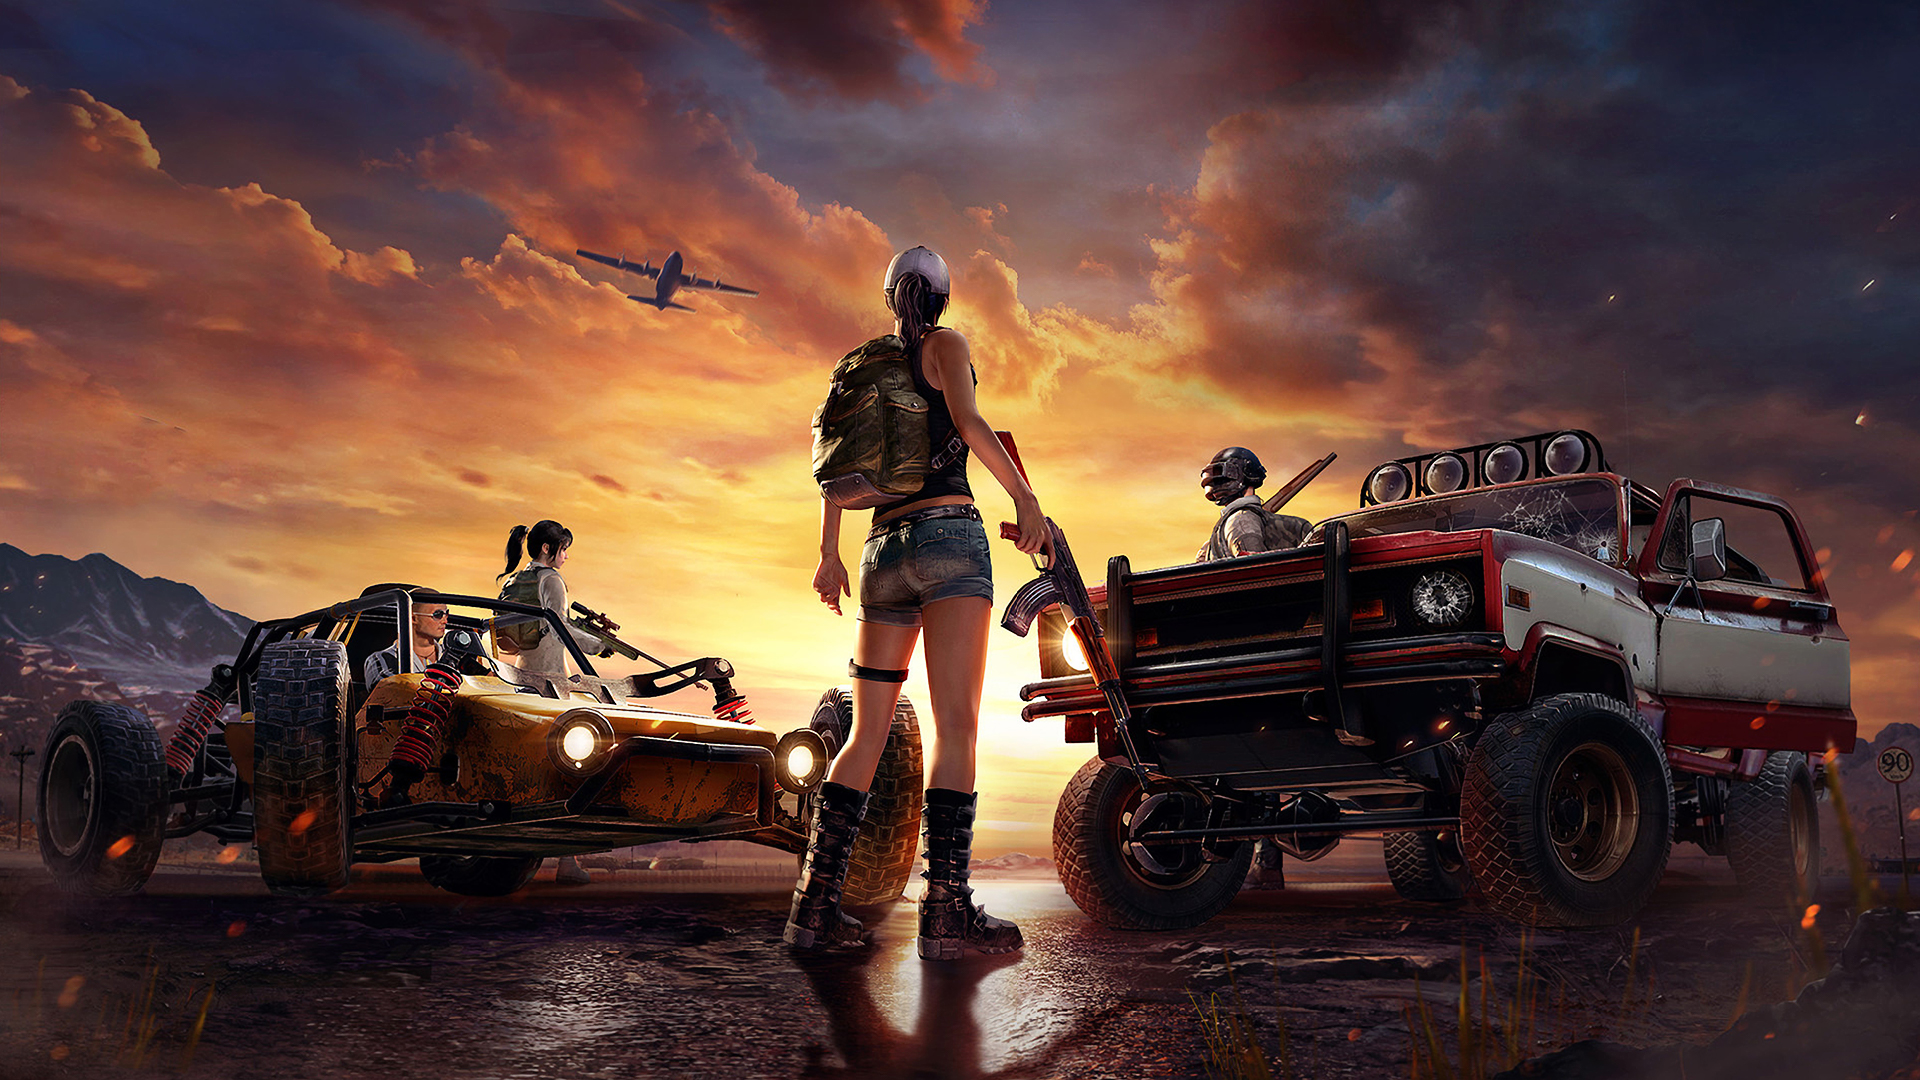 Best PUBG Wallpapers HD Download with 4k, 1080p resolution